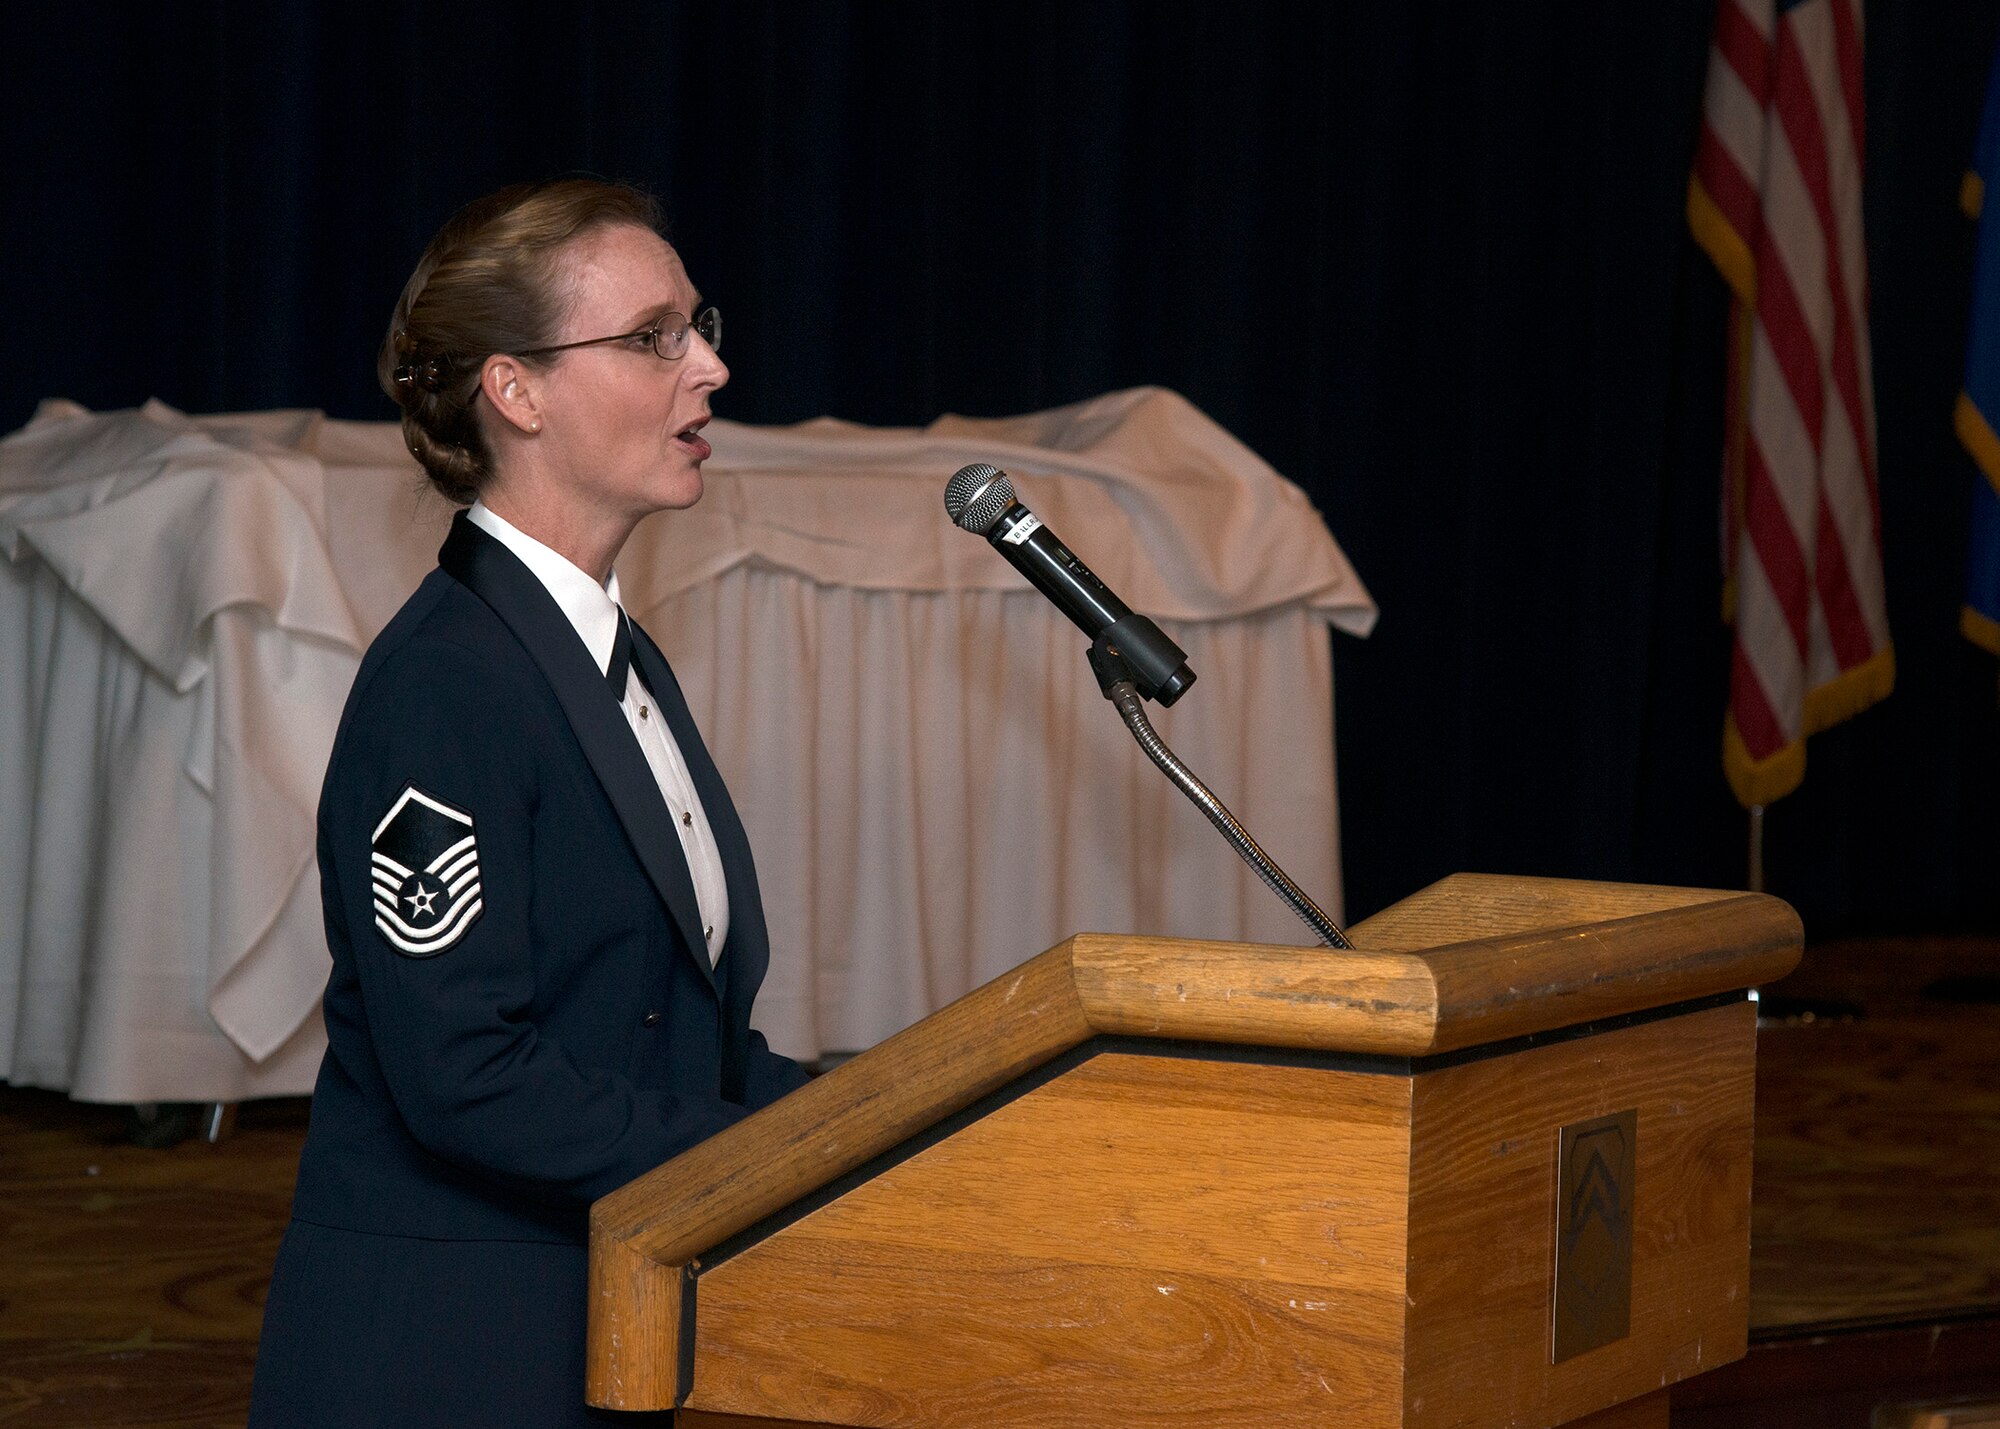 Master Sgt. Anne Baker, soprano vocalist with the U.S. Air Force Singing Sergeants, sang the national anthem for her birth son’s pilot graduation May 20, at Luke Air Force Base, Arizona.